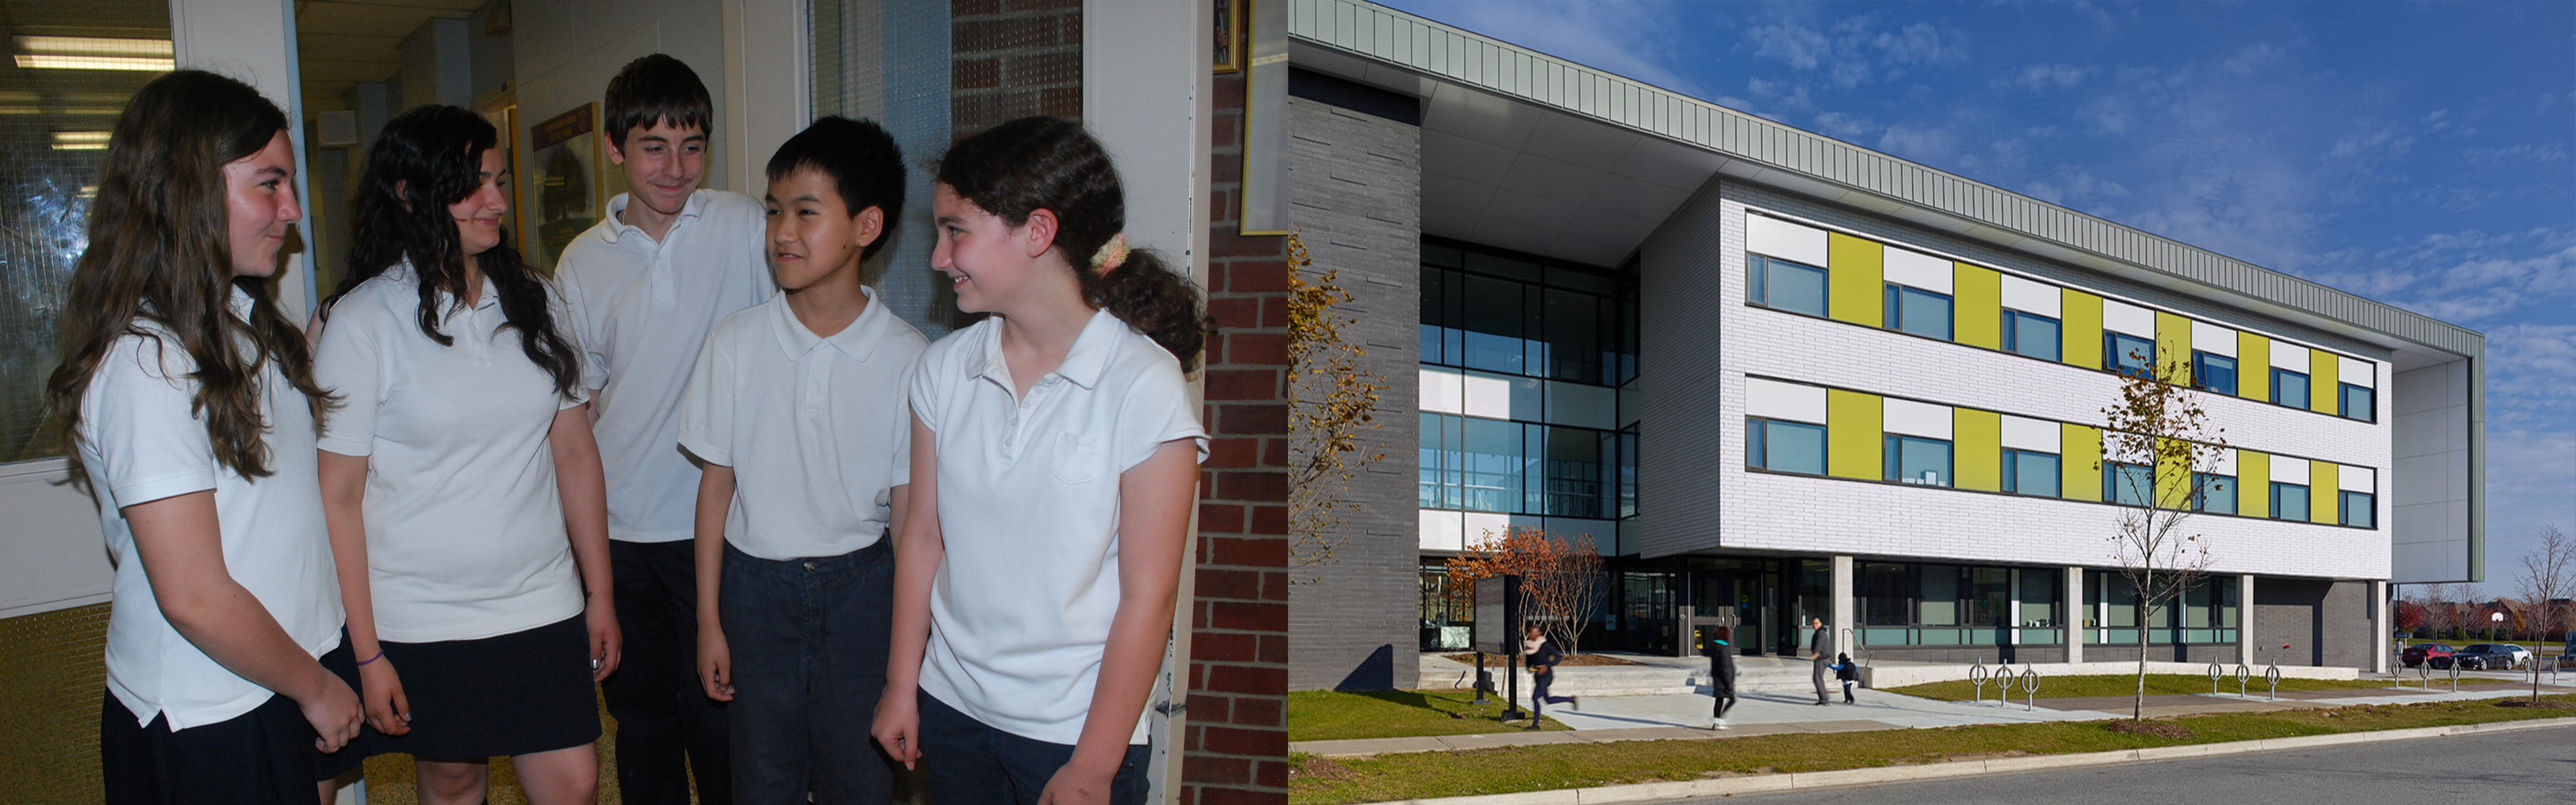 Left, elementary students in white and navy school uniform. Right, the front of the Blessed Pier Giorgio Frassati school building.